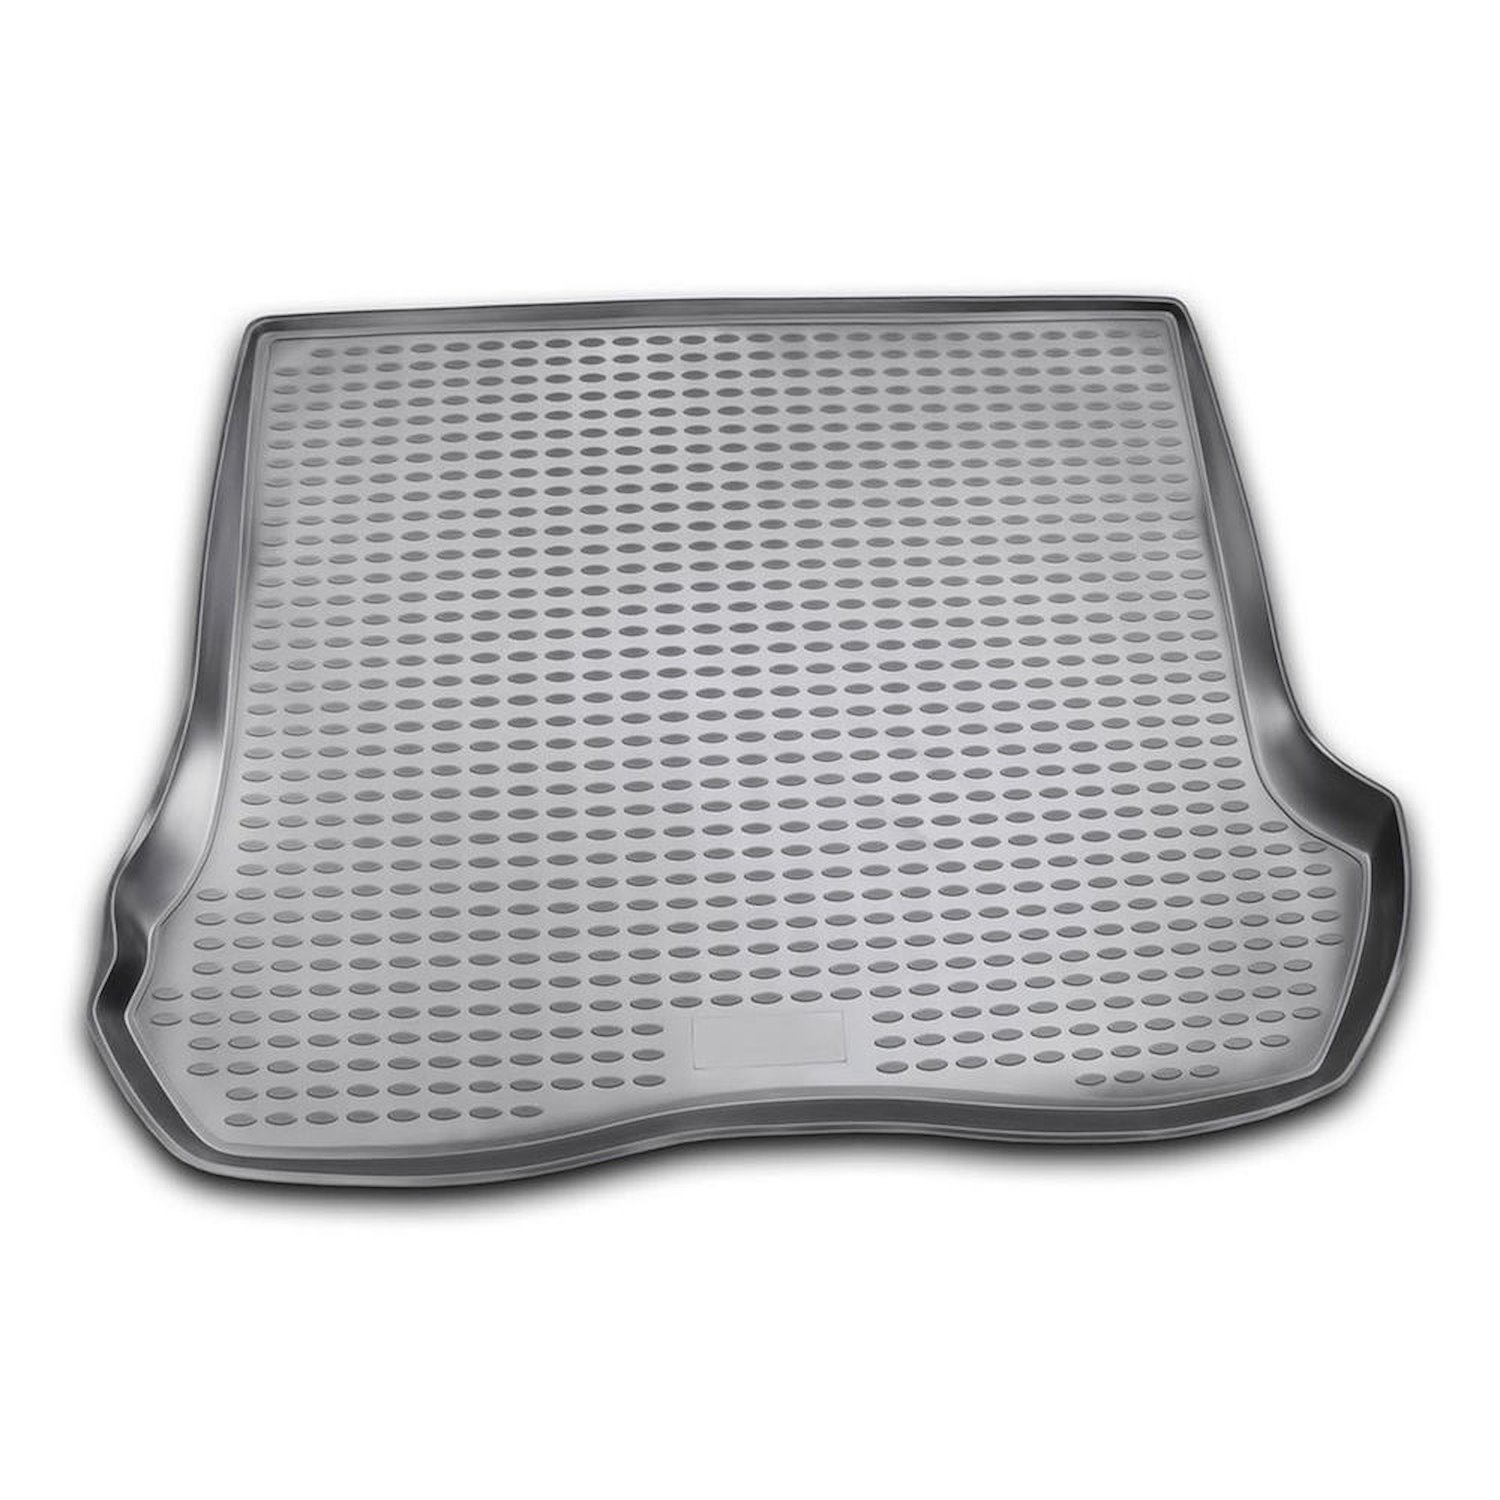 Profile Cargo Liner for 2005-2010 Jeep Grand Cherokee